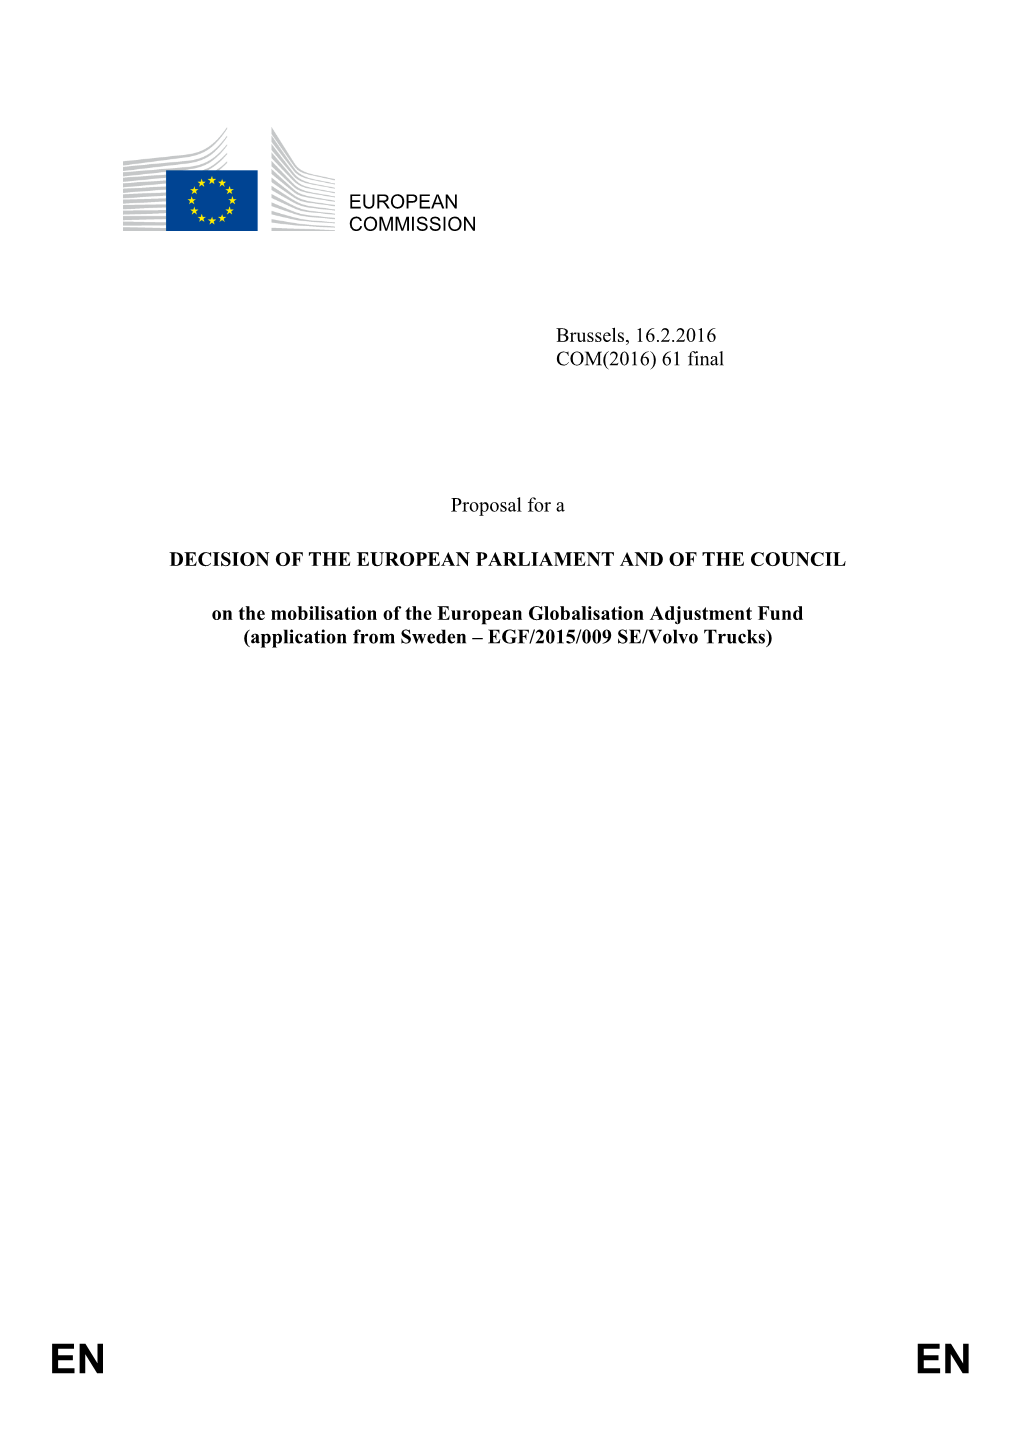 EUROPEAN COMMISSION Brussels, 16.2.2016 COM(2016) 61 Final Proposal for a DECISION of the EUROPEAN PARLIAMENT and of the COUNCI